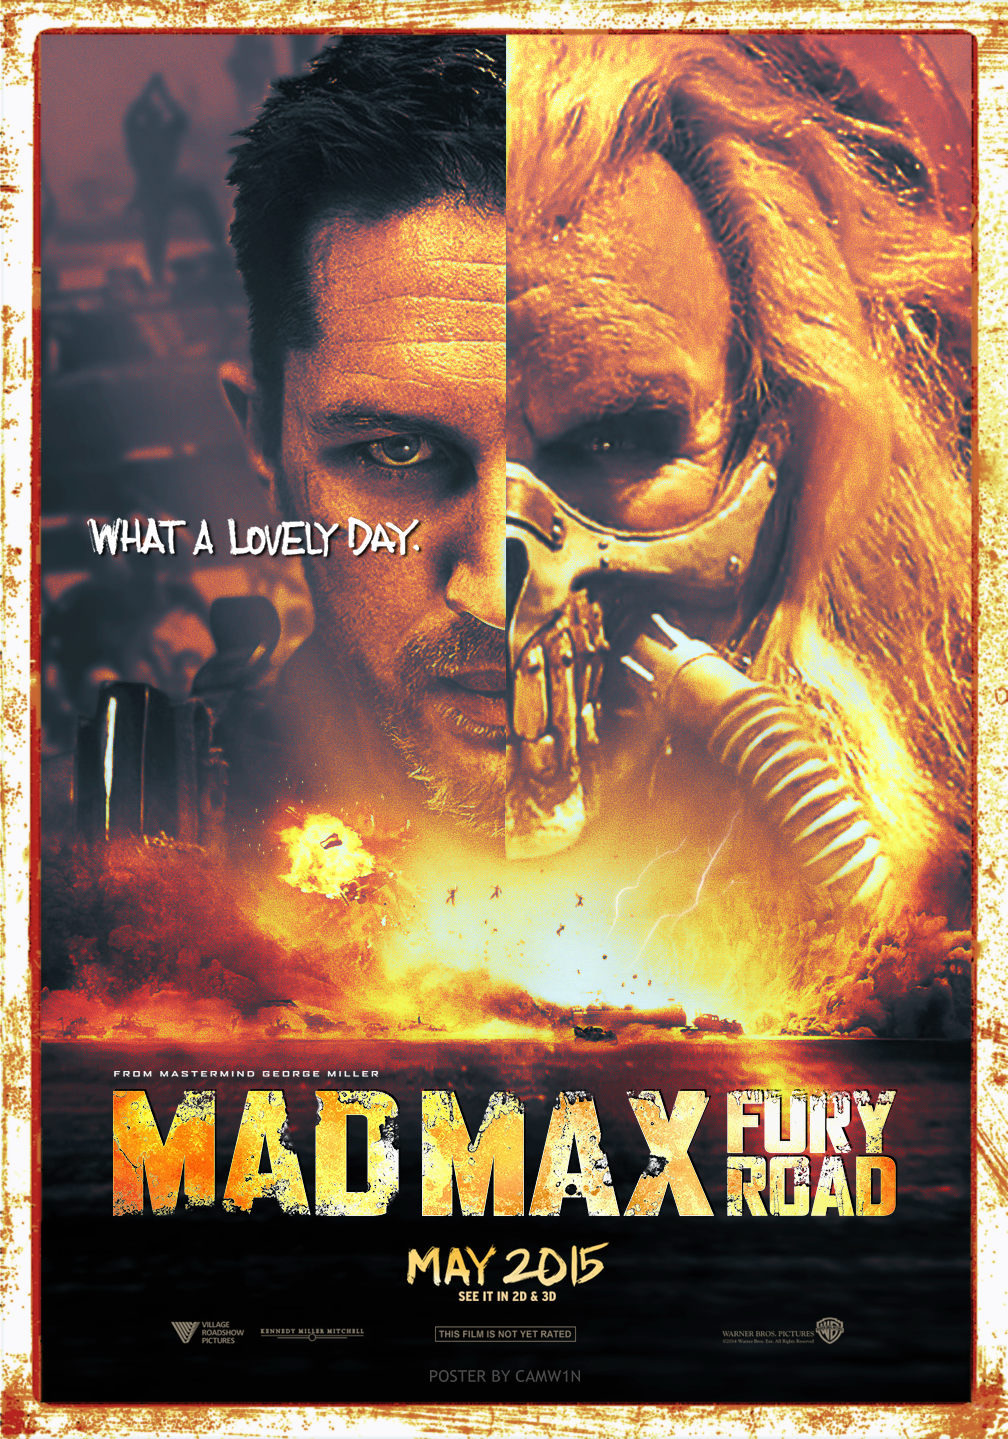 http://orig05.deviantart.net/5183/f/2015/025/5/a/mad_max__fury_road__2015____poster_by_camw1n-d8fbn8z.png